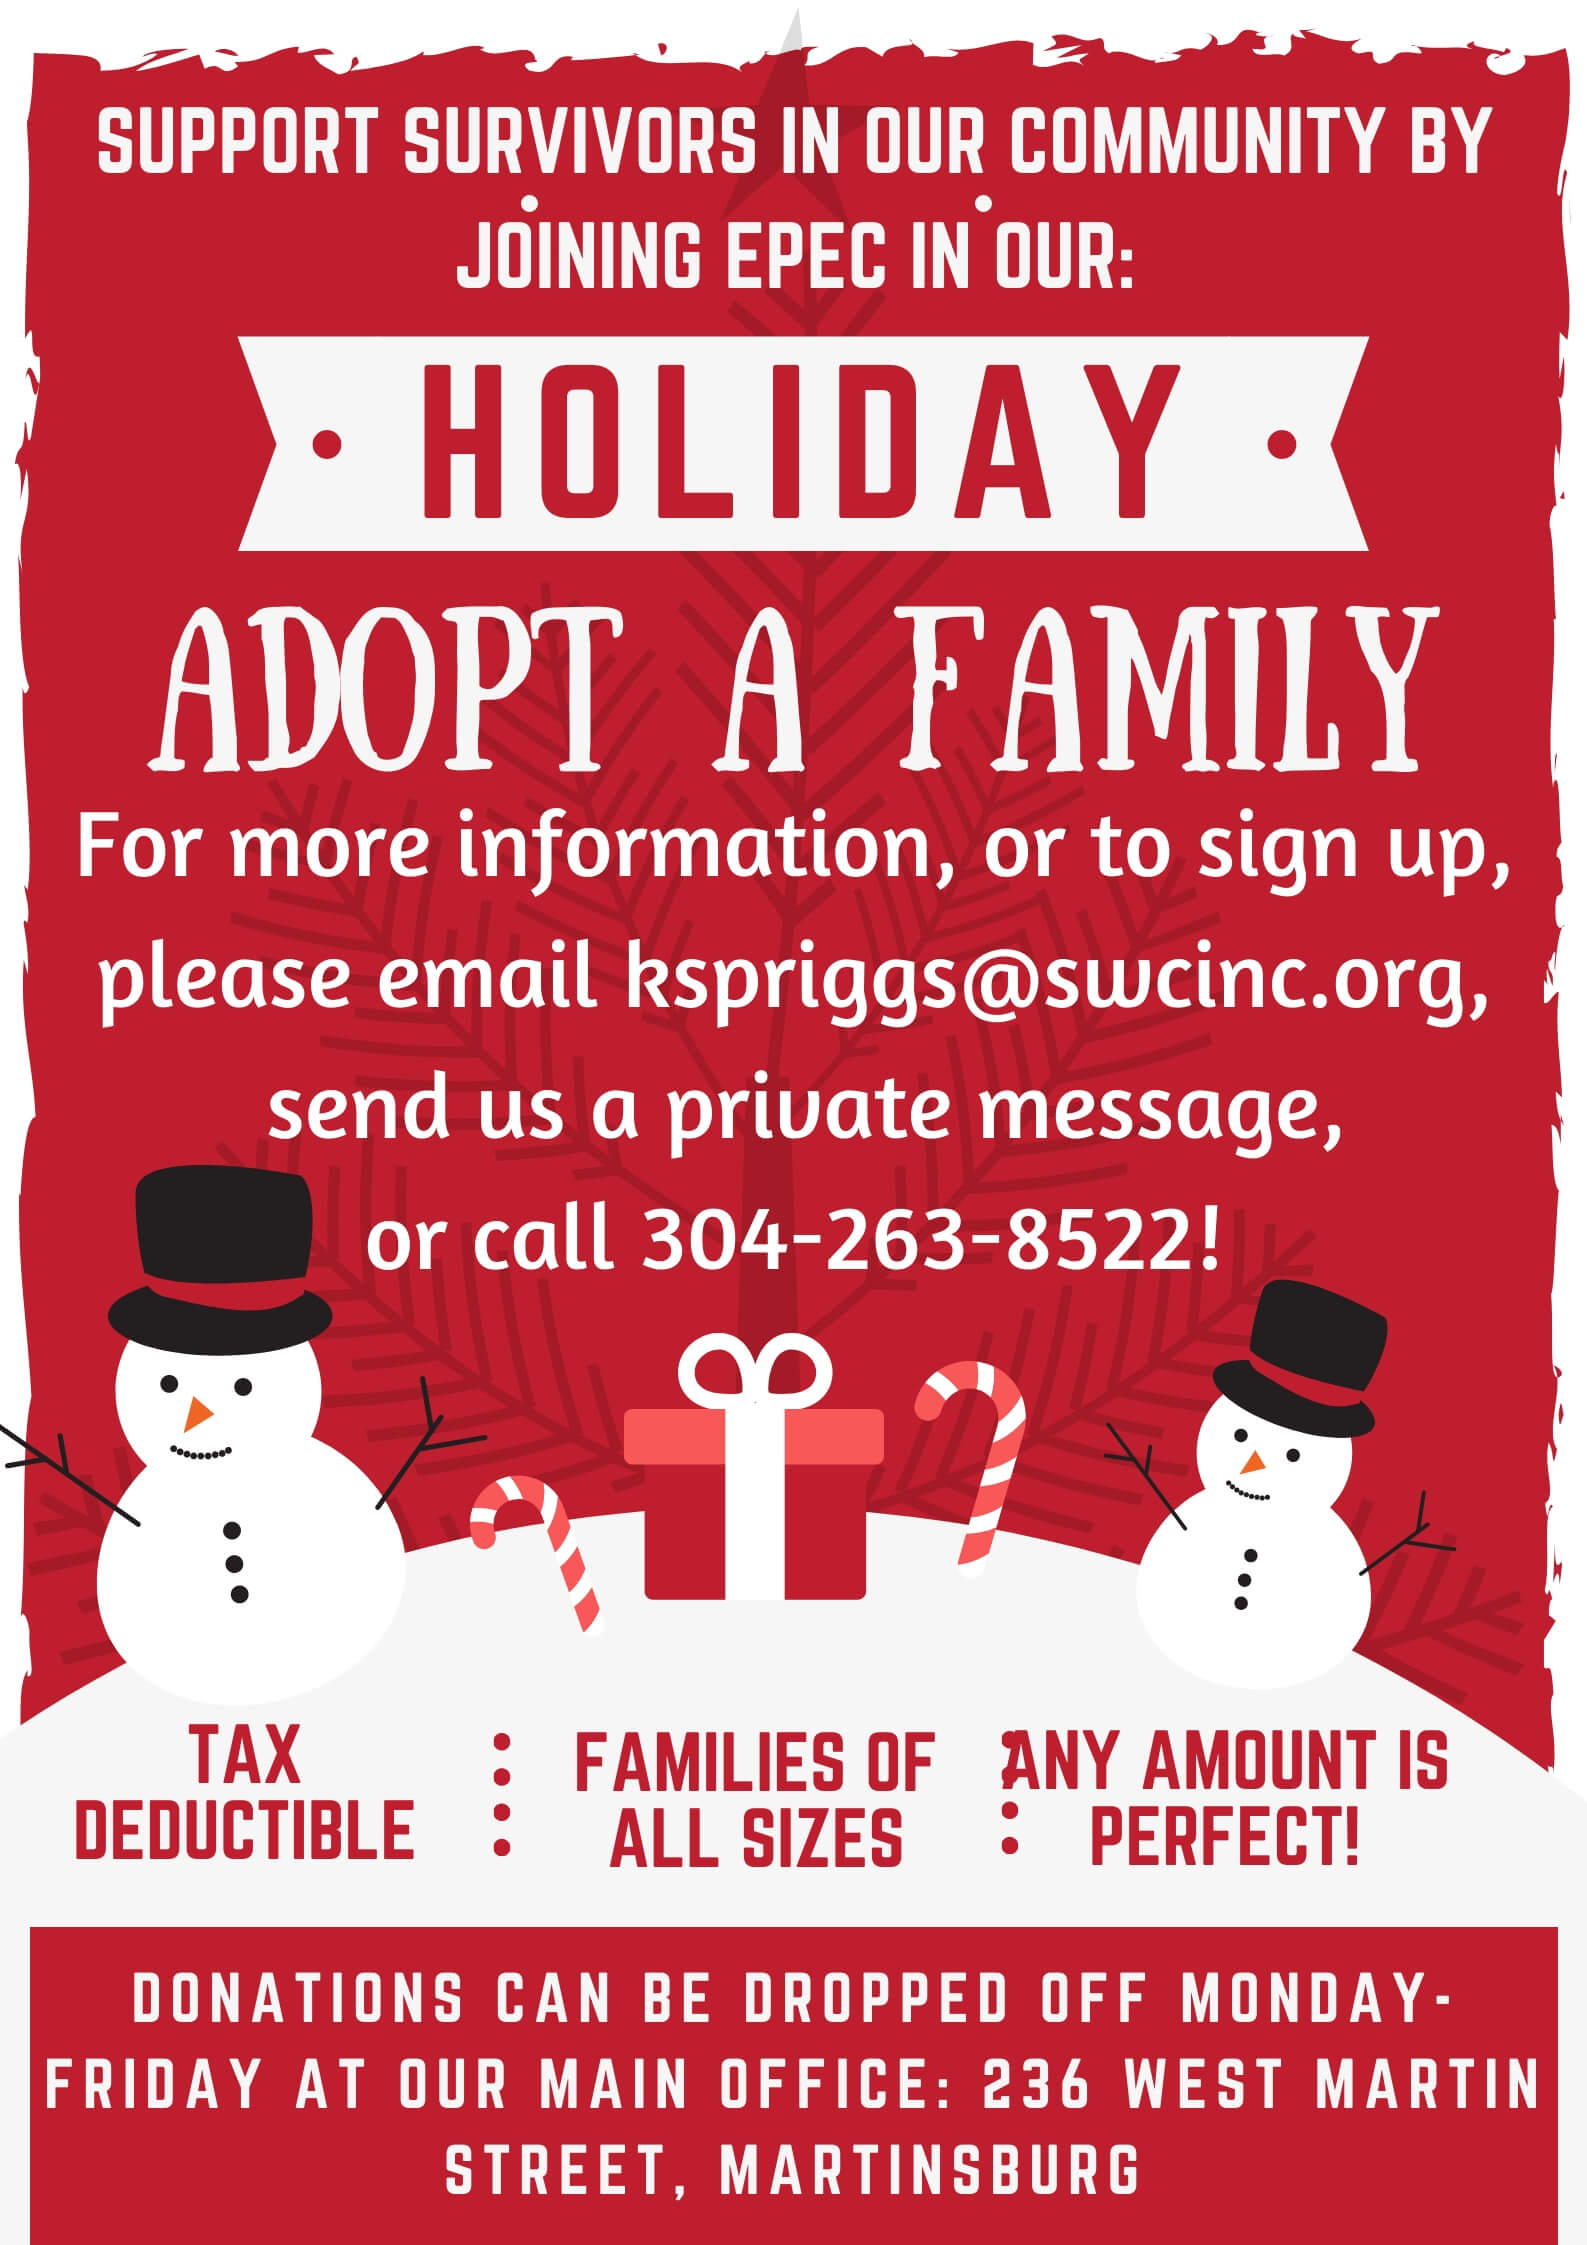 Holiday Adopt A Family EPEC